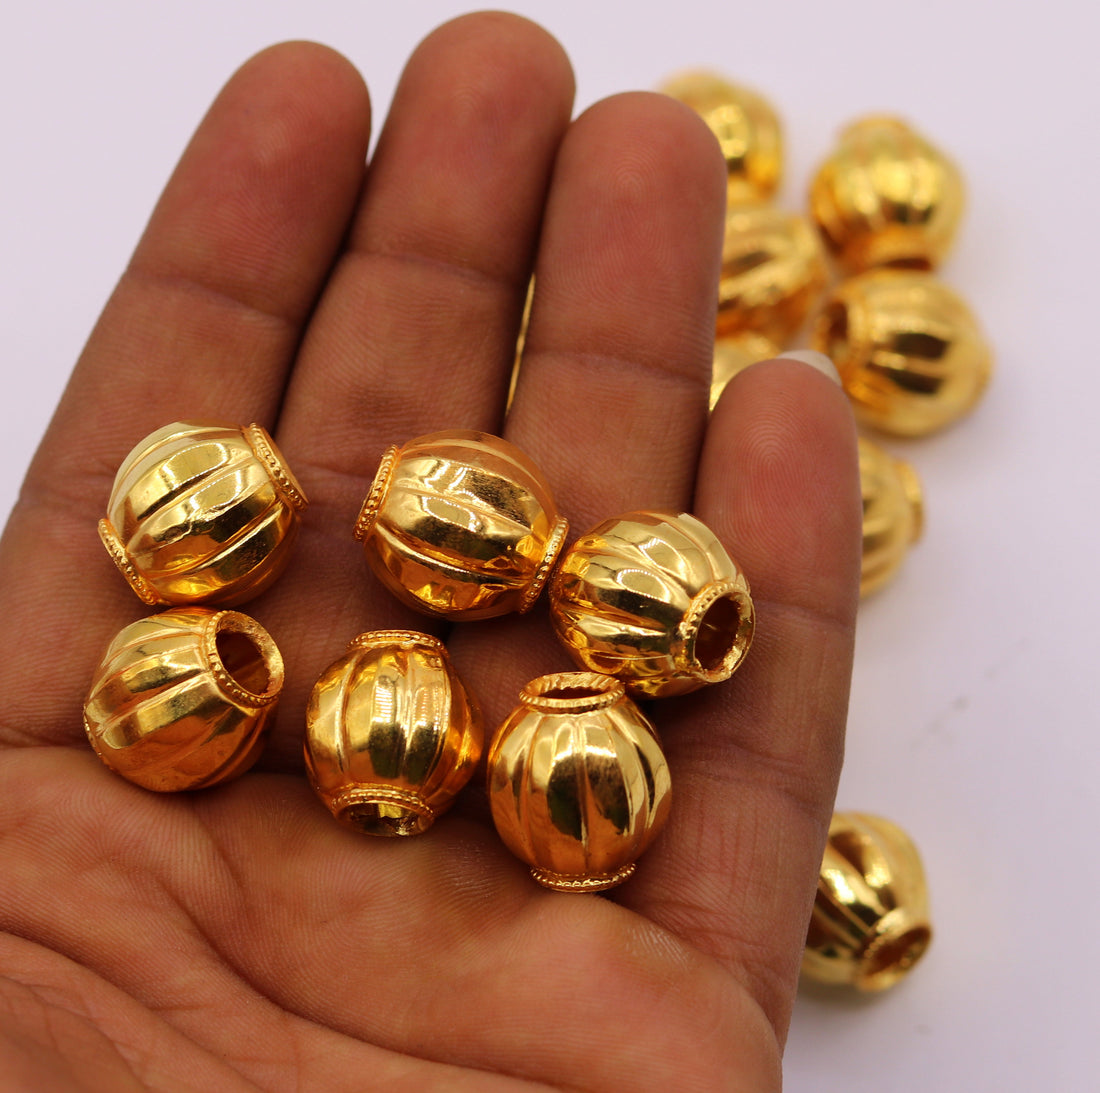 22kt yellow gold handmade antique design traditional jewelry making loose beads tribal jewelry bead07 - TRIBAL ORNAMENTS